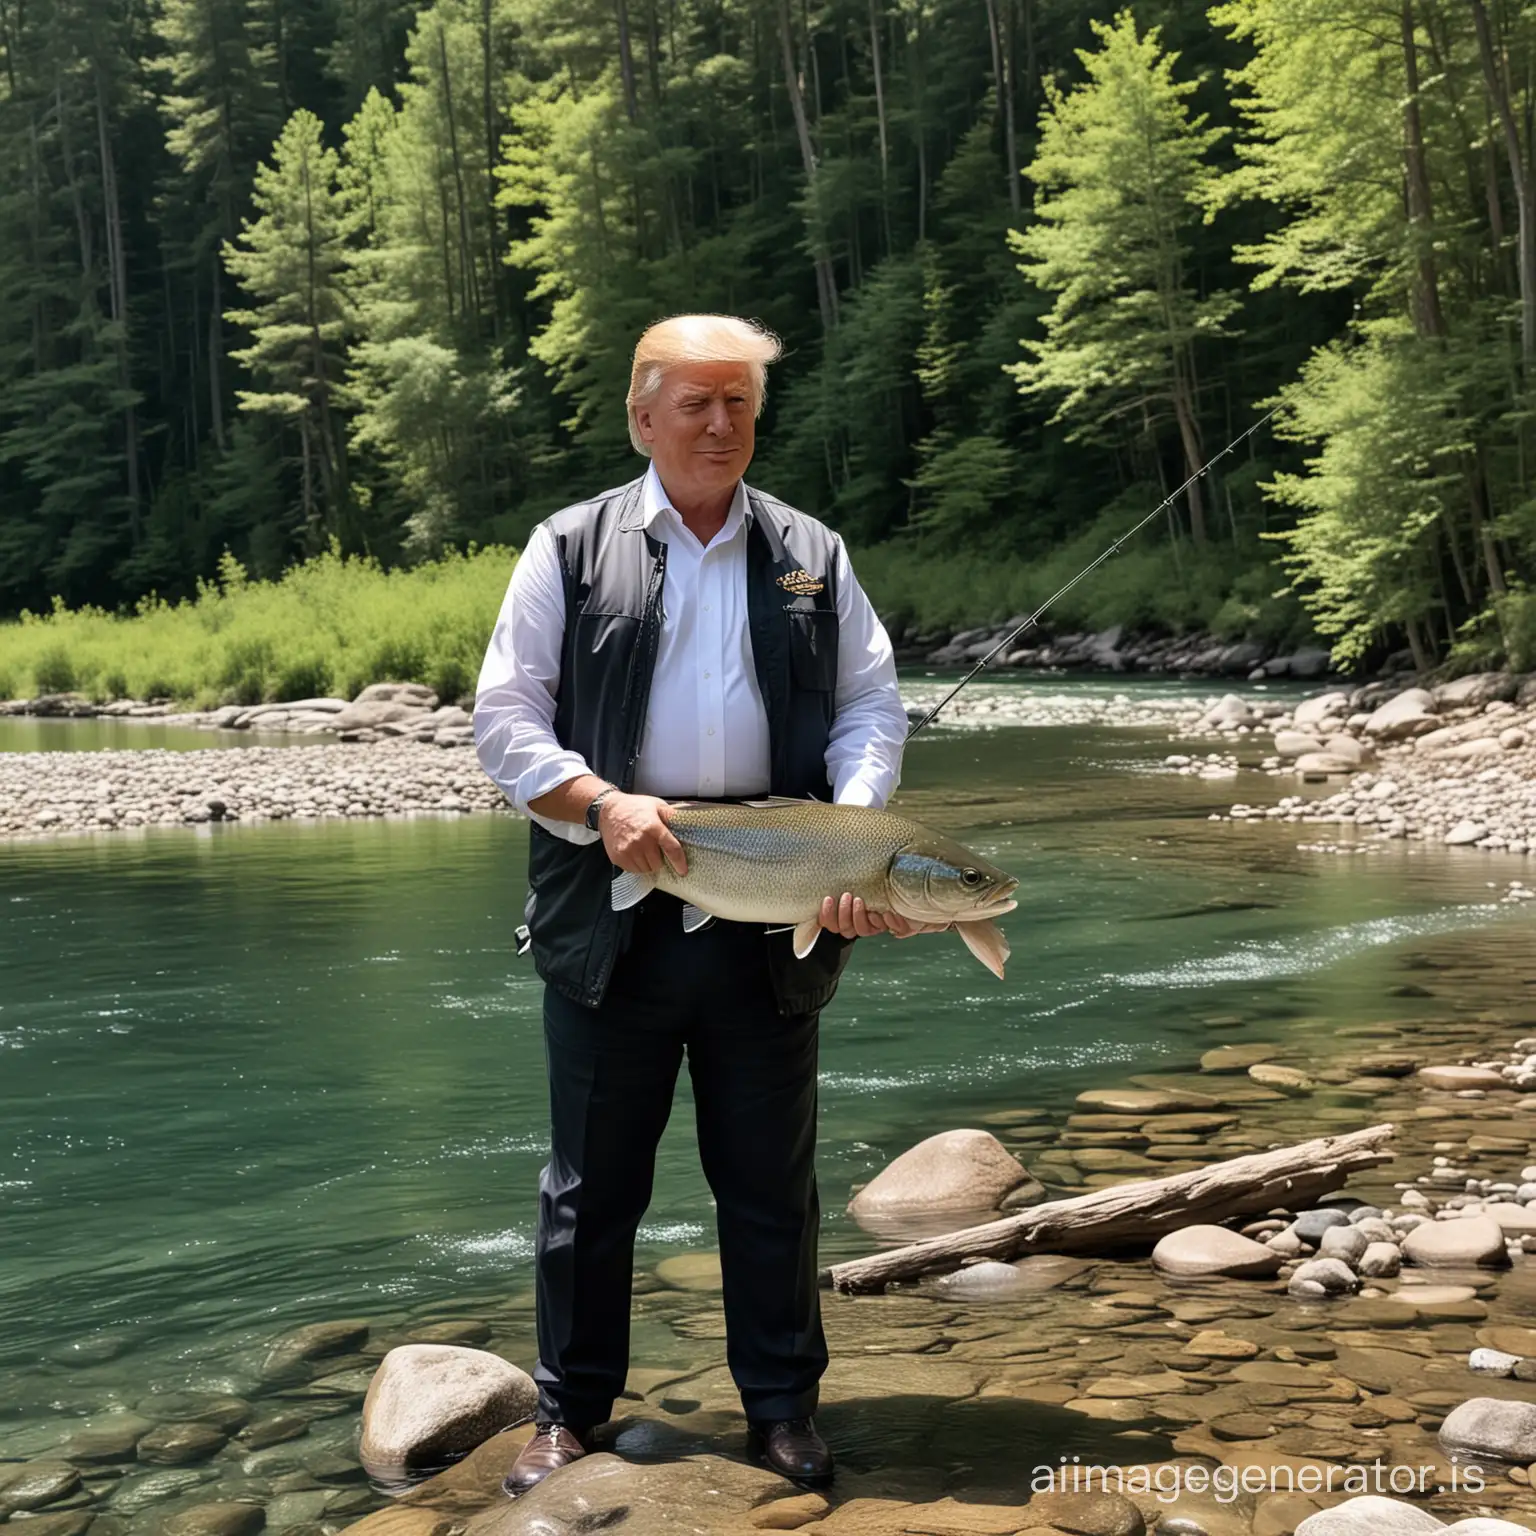 Former-President-Trump-Fishing-by-CrystalClear-River-in-Majestic-Serenity